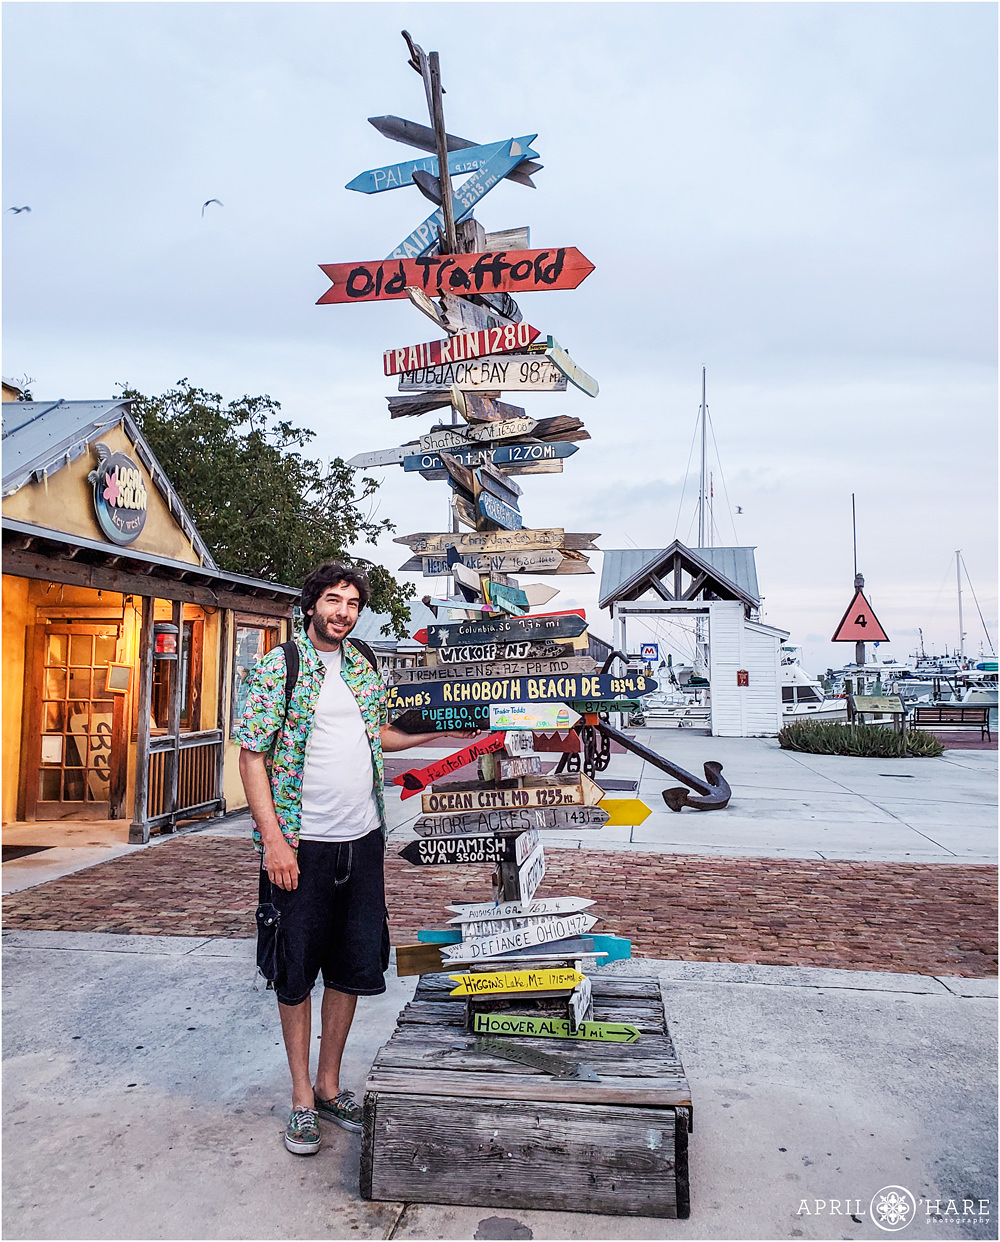 Posing with the mileage sign at the pier in Key West on a road trip through the Florida Keys